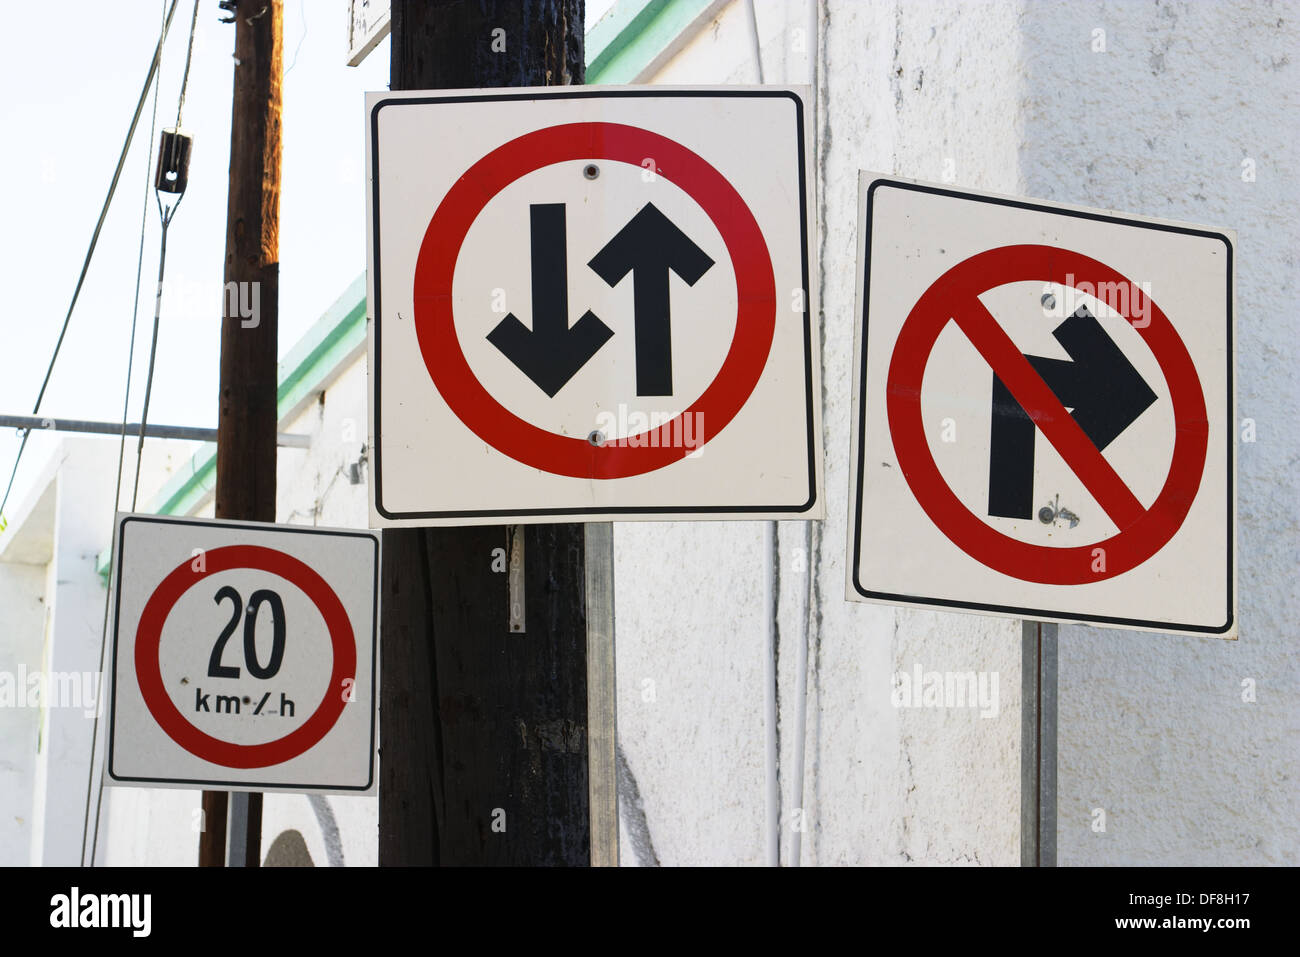 Traffic signs, two way traffic, no right turn, speed limit, kilometers per hour. Cabo San Lucas, Mexico Stock Photo